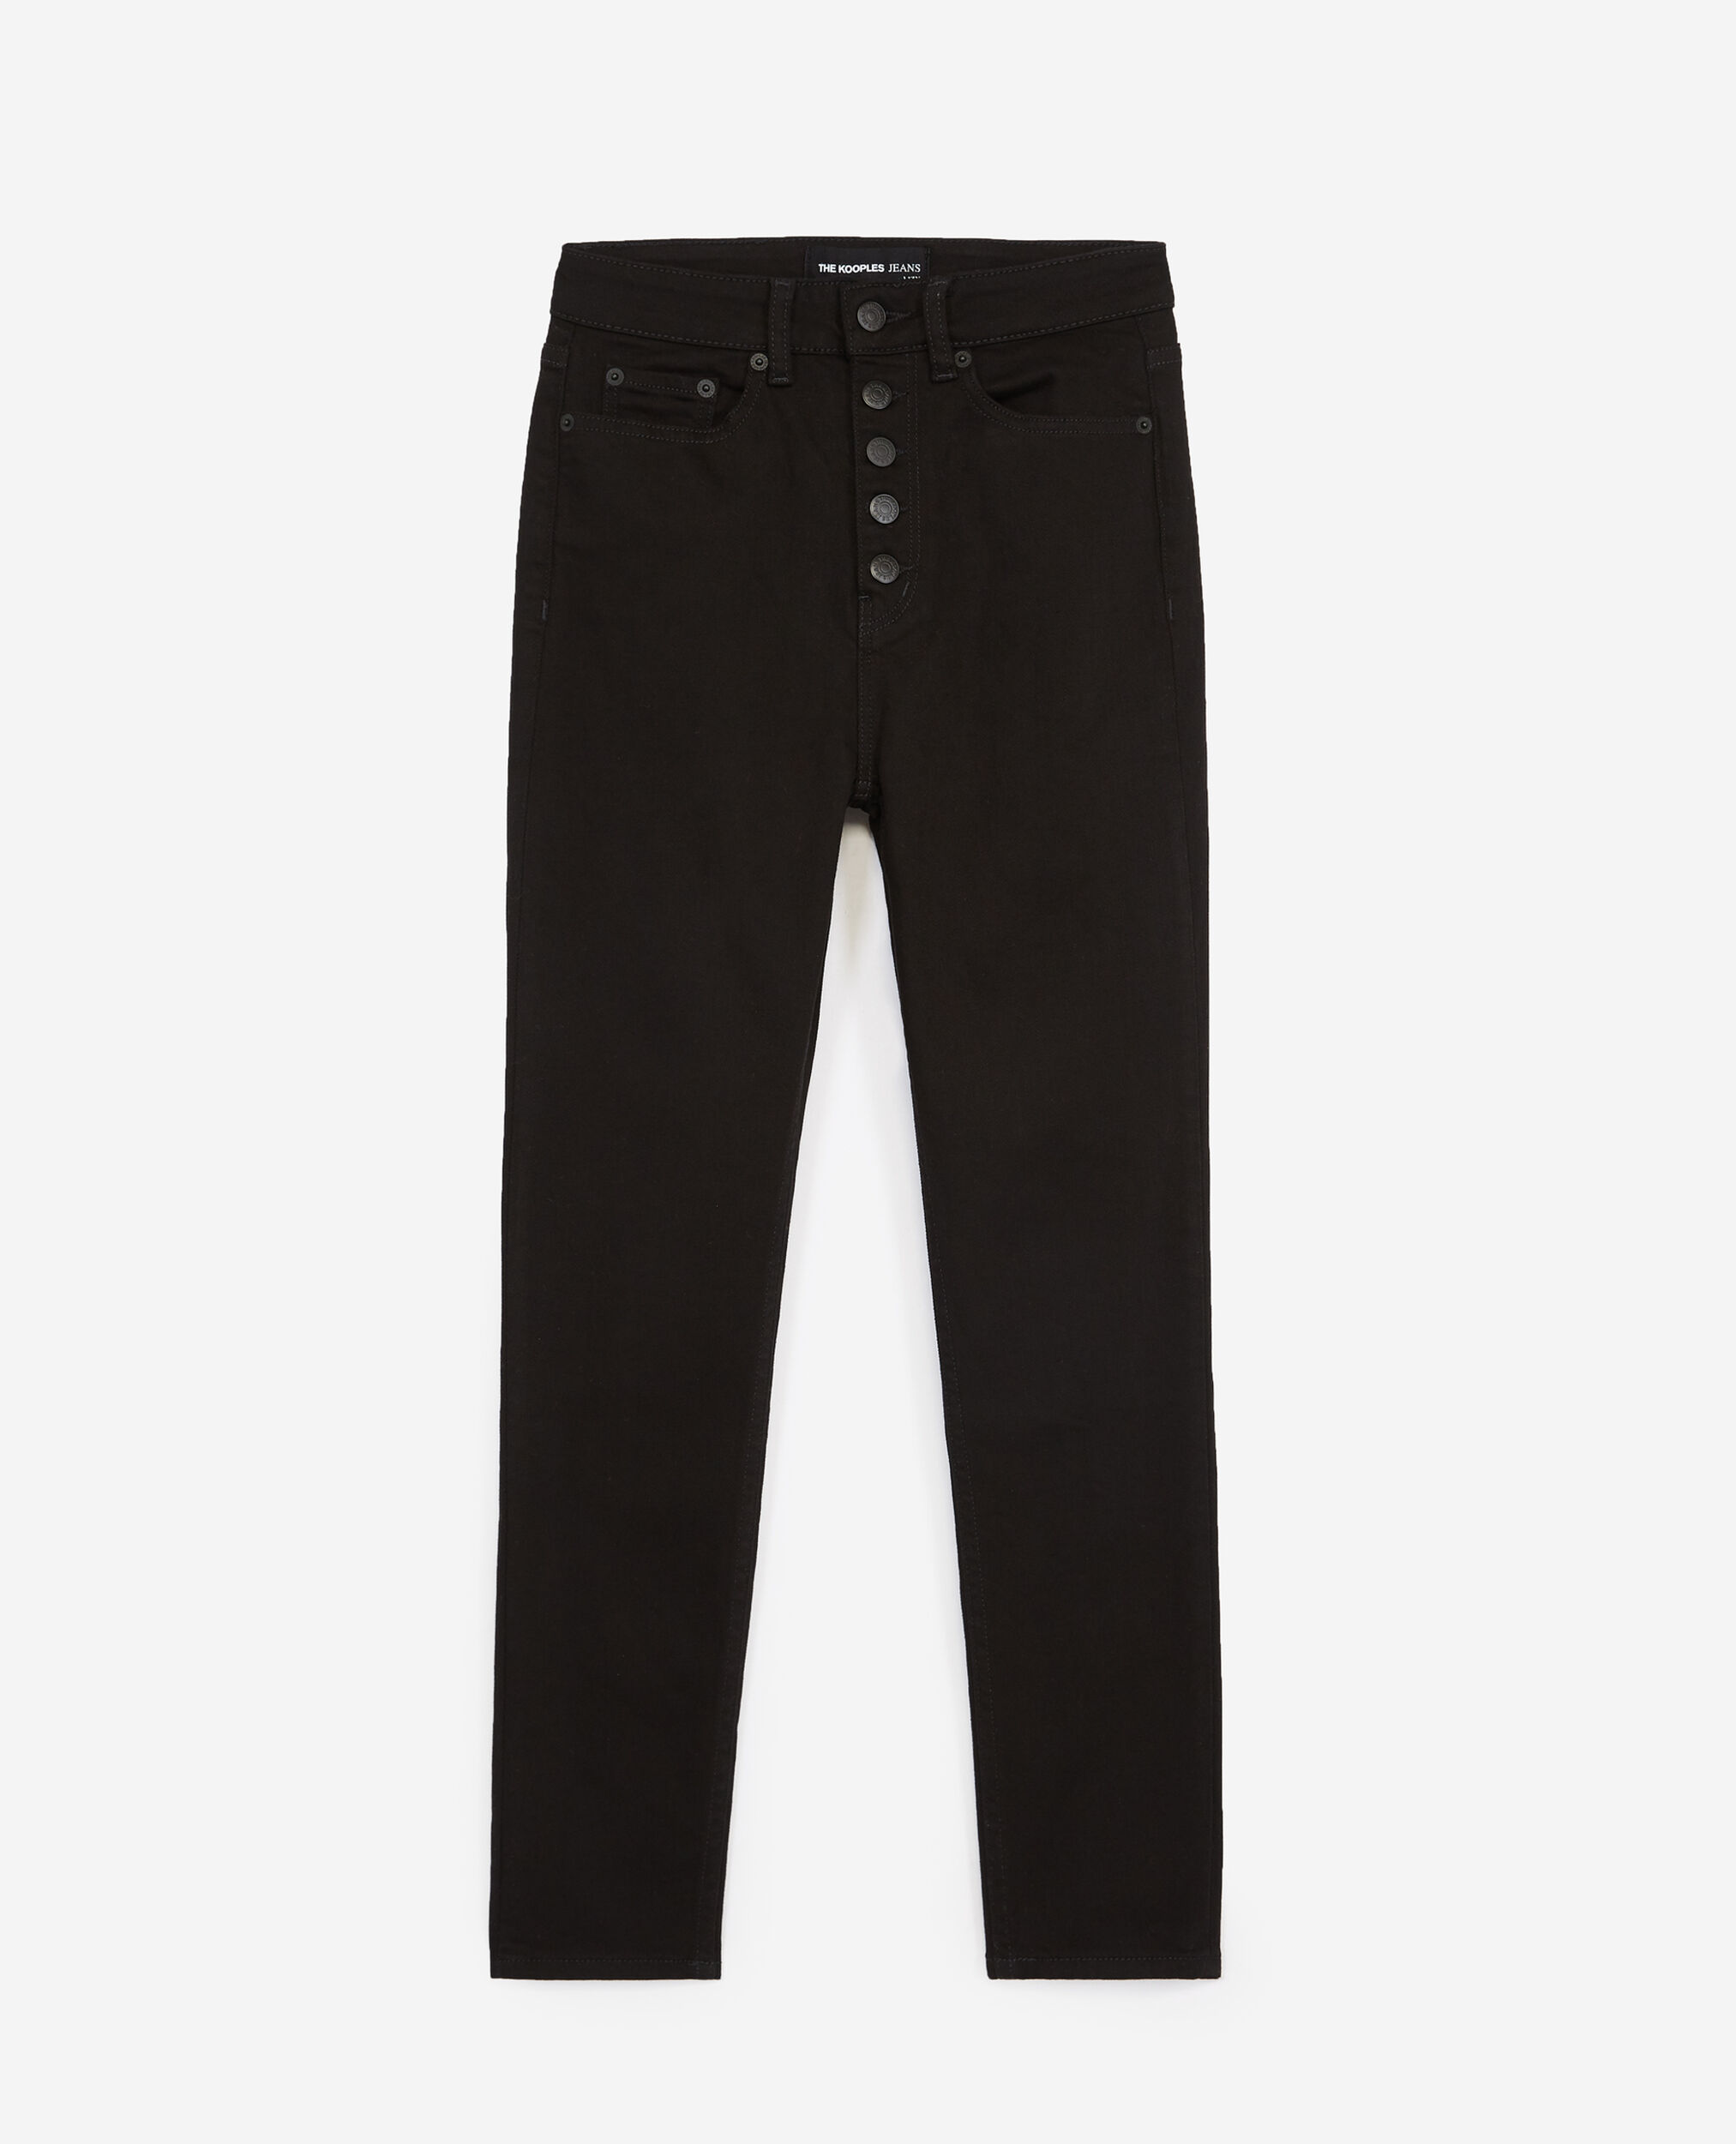 Slim-fit black jeans with buttons, BLACK, hi-res image number null